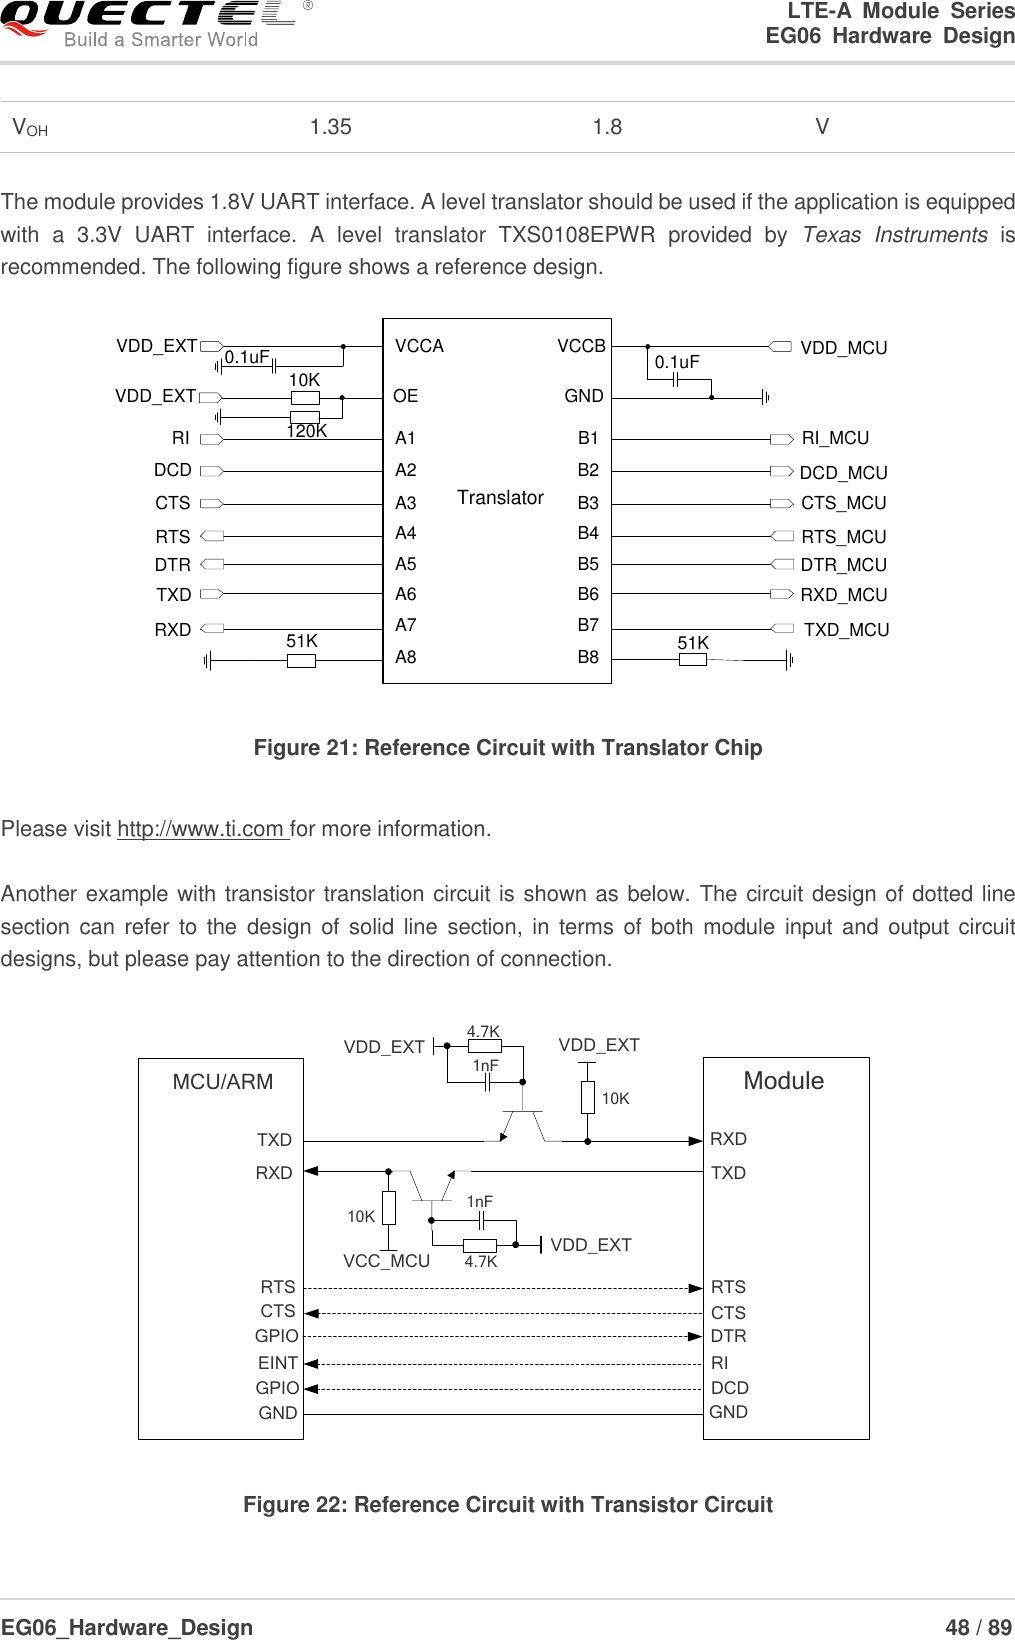 LTE-A  Module  Series                                                  EG06  Hardware  Design  EG06_Hardware_Design                                                               48 / 89     The module provides 1.8V UART interface. A level translator should be used if the application is equipped with  a  3.3V  UART  interface.  A  level  translator  TXS0108EPWR  provided  by  Texas  Instruments  is recommended. The following figure shows a reference design. VCCA VCCBOEA1A2A3A4A5A6A7A8GNDB1B2B3B4B5B6B7B8VDD_EXTRIDCDRTSRXDDTRCTSTXD51K 51K0.1uF 0.1uFRI_MCUDCD_MCURTS_MCUTXD_MCUDTR_MCUCTS_MCURXD_MCUVDD_MCUTranslatorVDD_EXT 10K120K Figure 21: Reference Circuit with Translator Chip  Please visit http://www.ti.com for more information.  Another example with transistor translation circuit is shown as below. The circuit design of dotted line section can  refer  to the  design of solid  line  section, in  terms  of both module  input  and output circuit designs, but please pay attention to the direction of connection. MCU/ARMTXDRXDVDD_EXT10KVCC_MCU 4.7K10KVDD_EXTTXDRXDRTSCTSDTRRIRTSCTSGNDGPIO DCDModuleGPIOEINTVDD_EXT4.7KGND1nF1nF Figure 22: Reference Circuit with Transistor Circuit VOH 1.35 1.8 V 